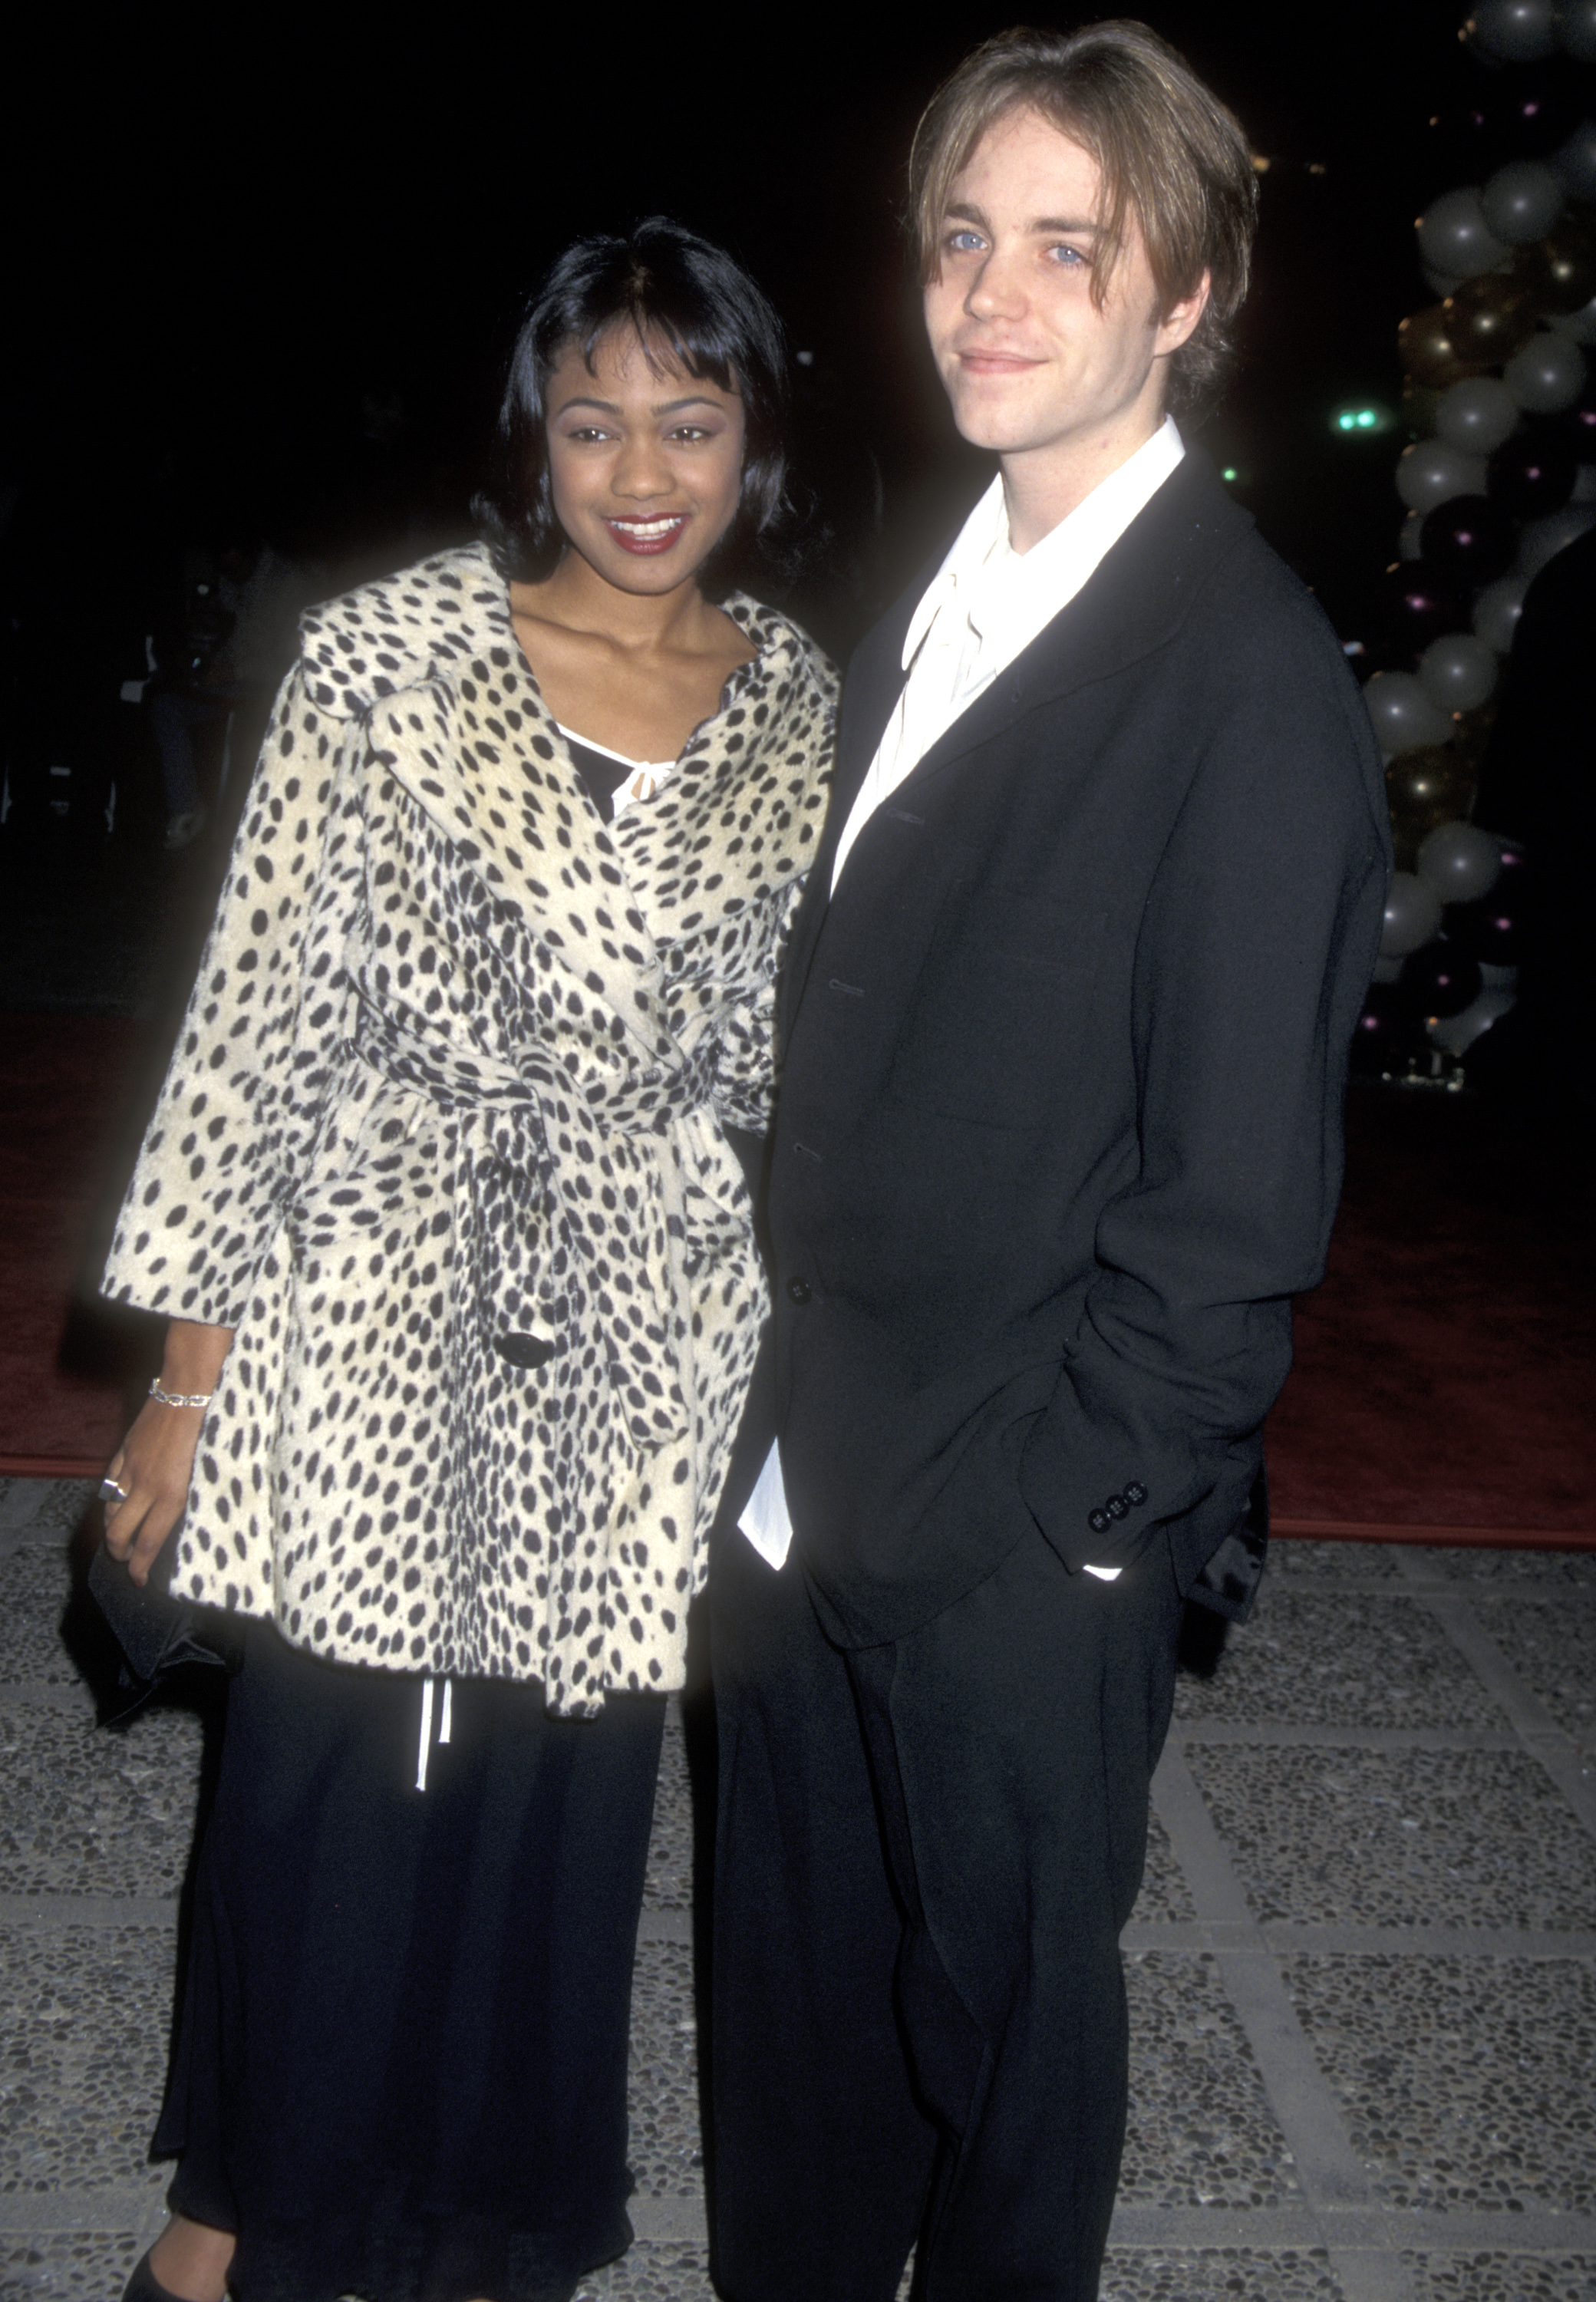 Tatyana Ali and Jonathan Brandis attend the 28th Annual NAACP Image Awards on February 9, 1997 in Pasadena, California | Source: Getty Images